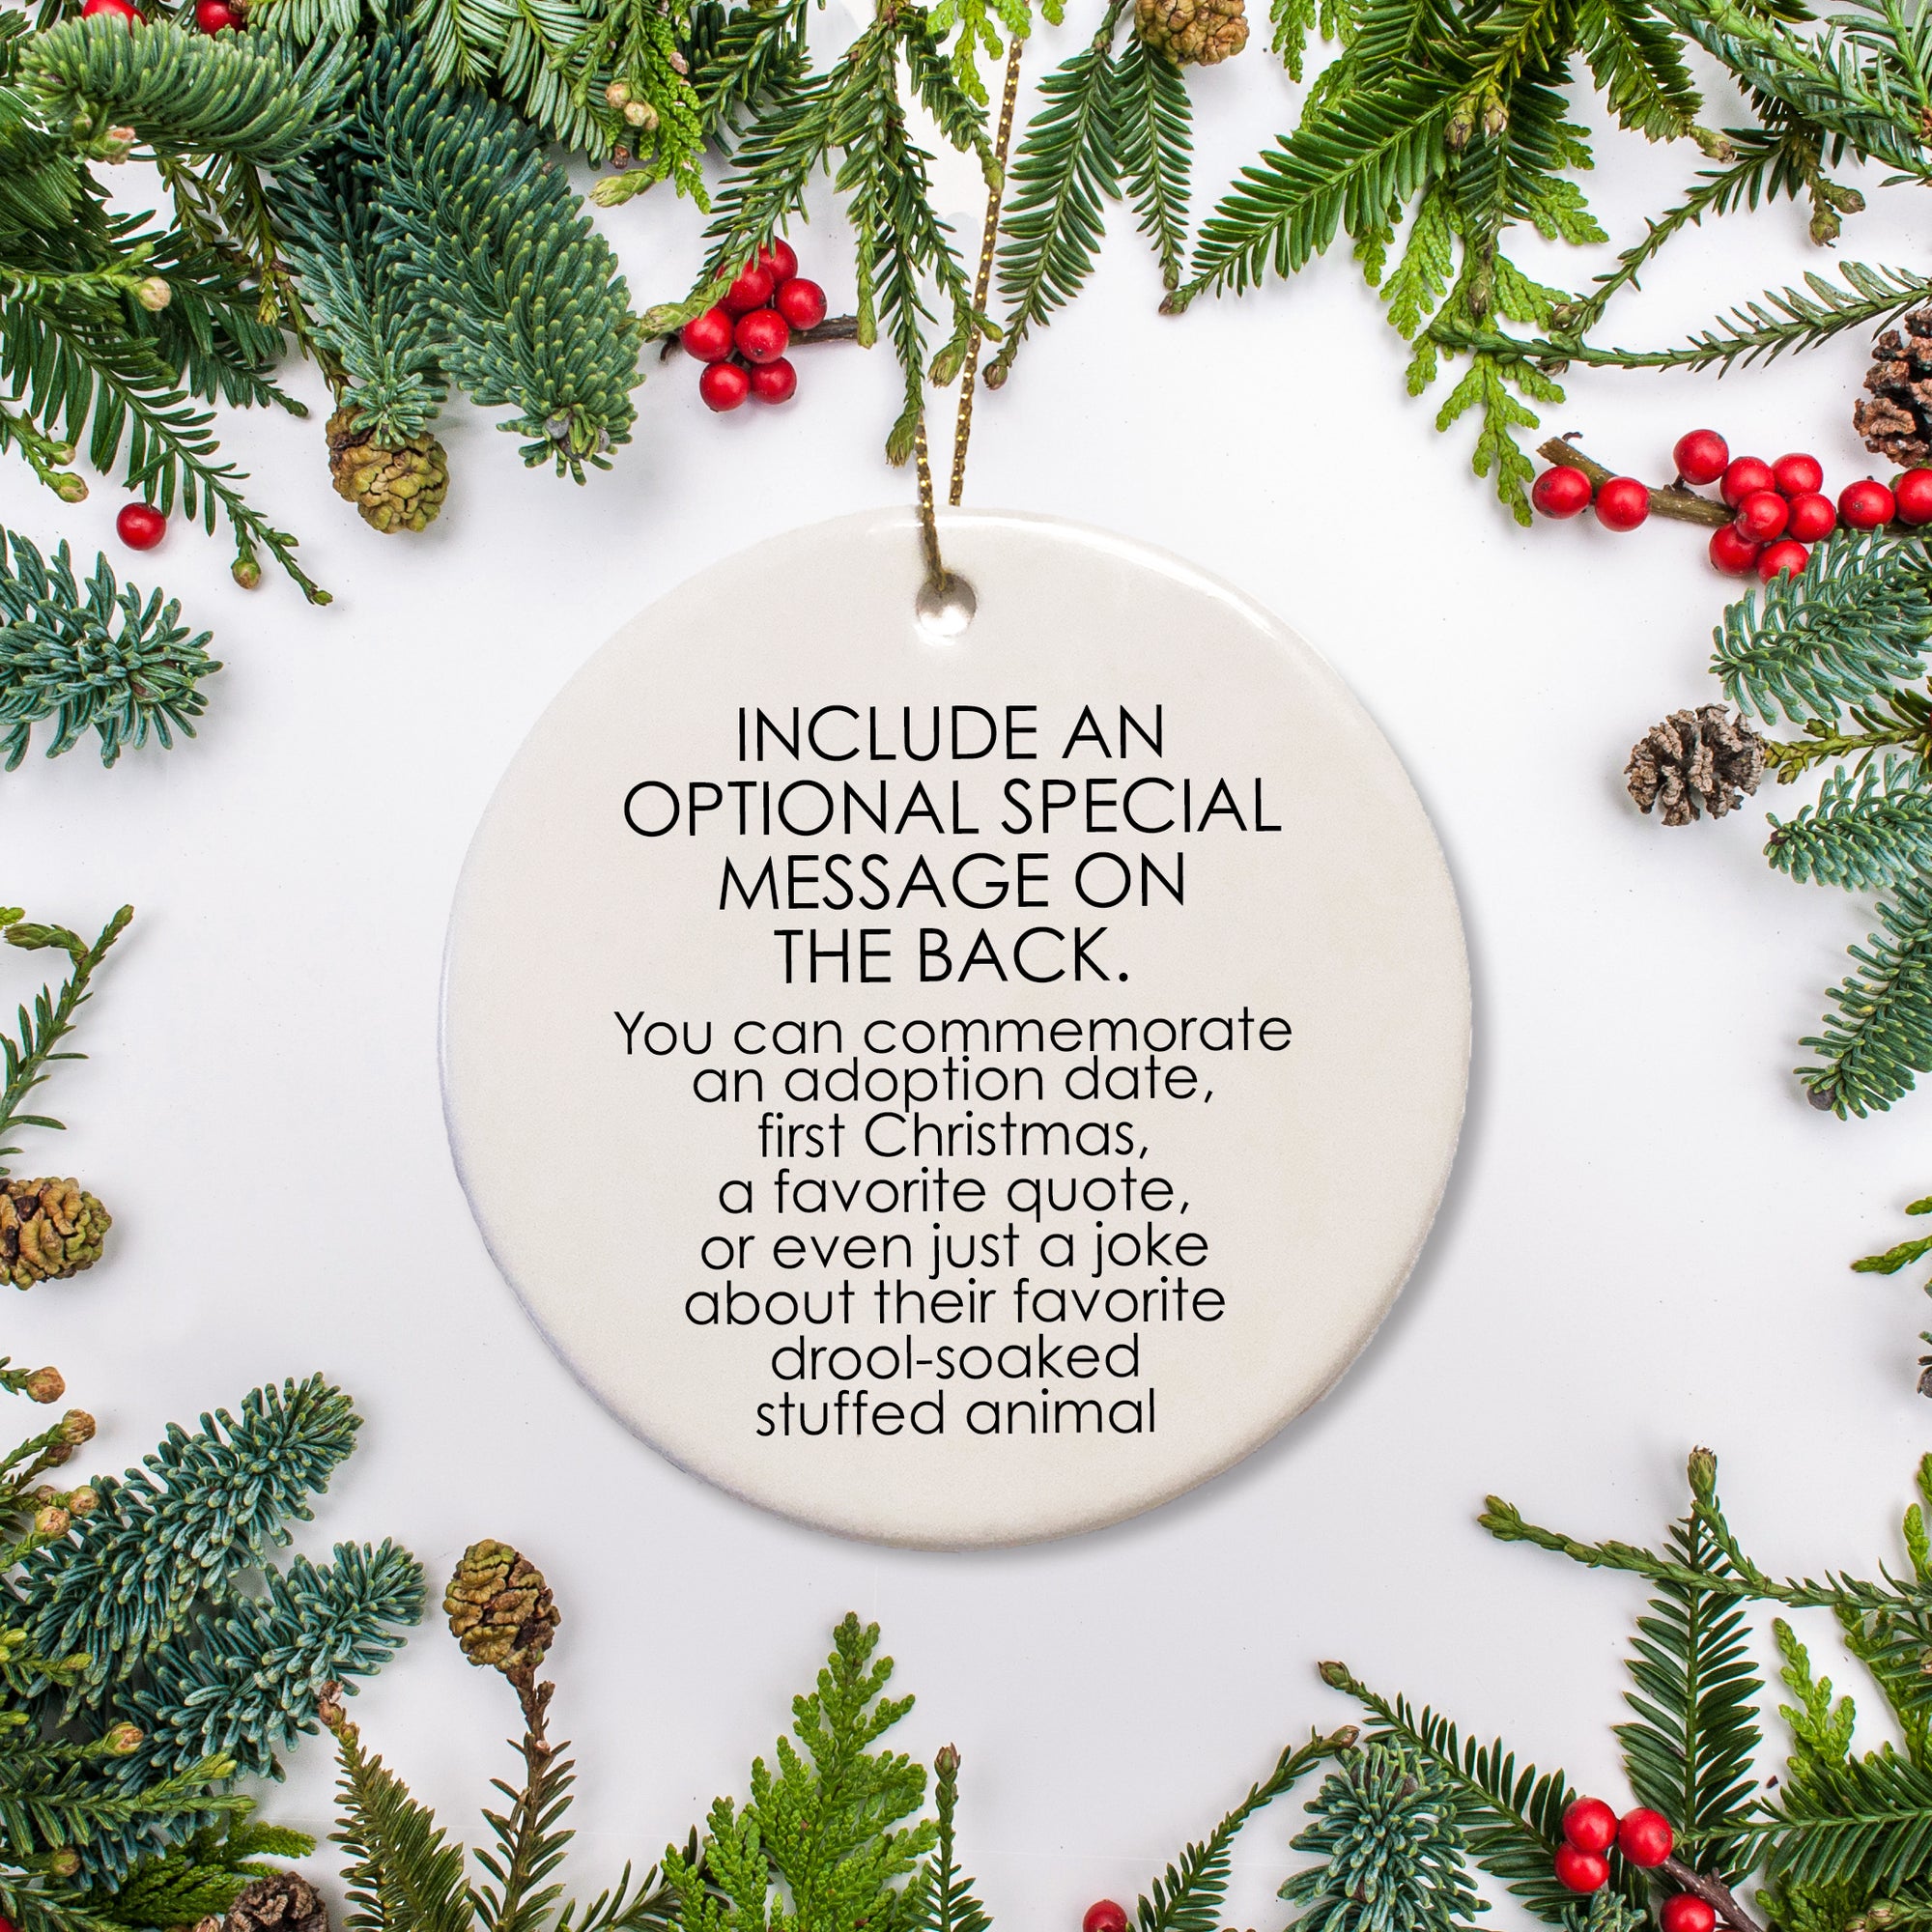 It is possible to add an optional message on the back of the ornament.  This can be whatever you choose: an adoption date, a first Christmas, a funny story, a favorite quote, etc.